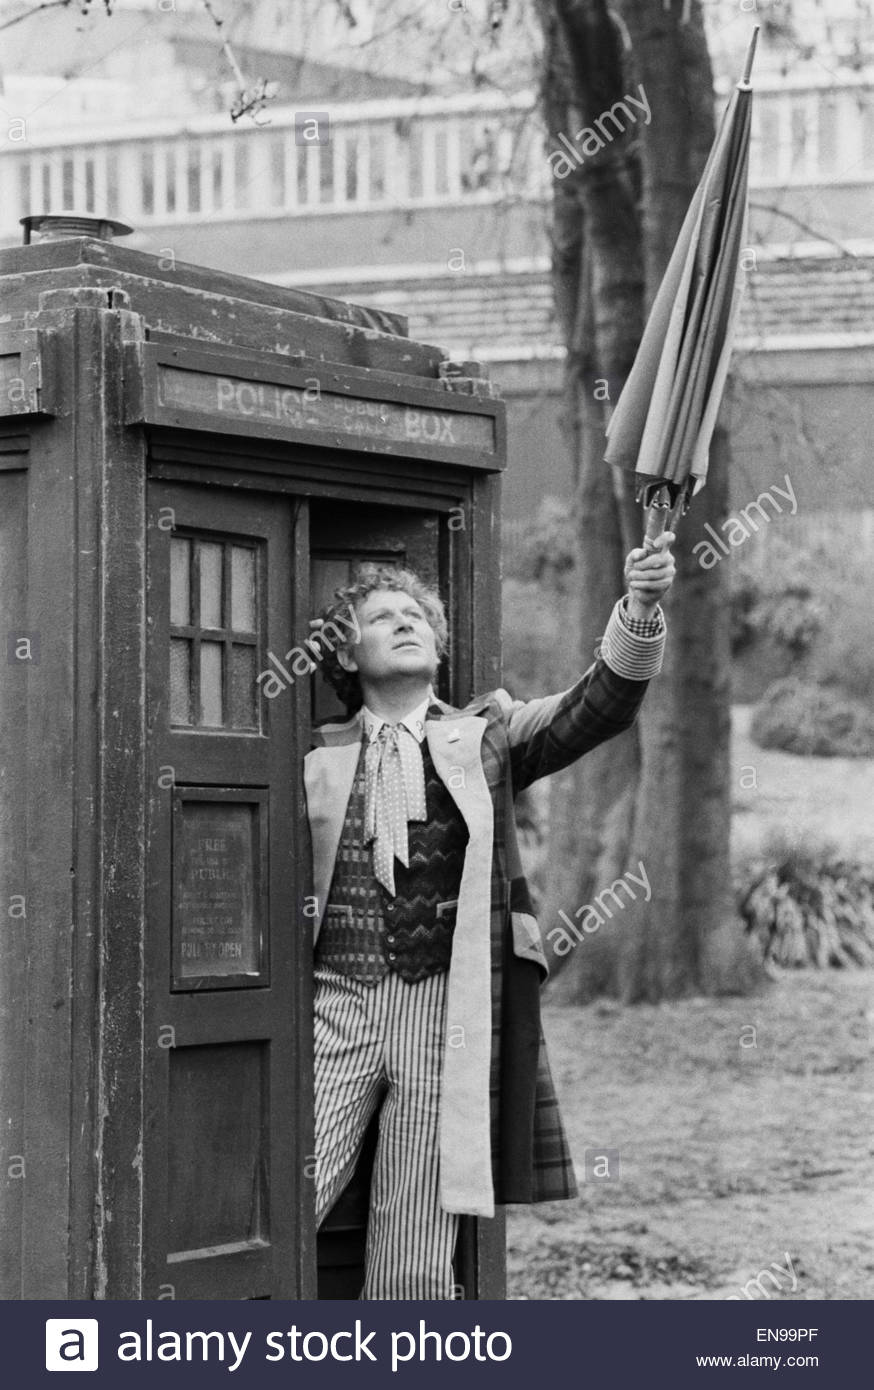 actor-colin-baker-recently-named-as-the-sixth-doctor-who-in-the-bbc-EN99PF.jpg